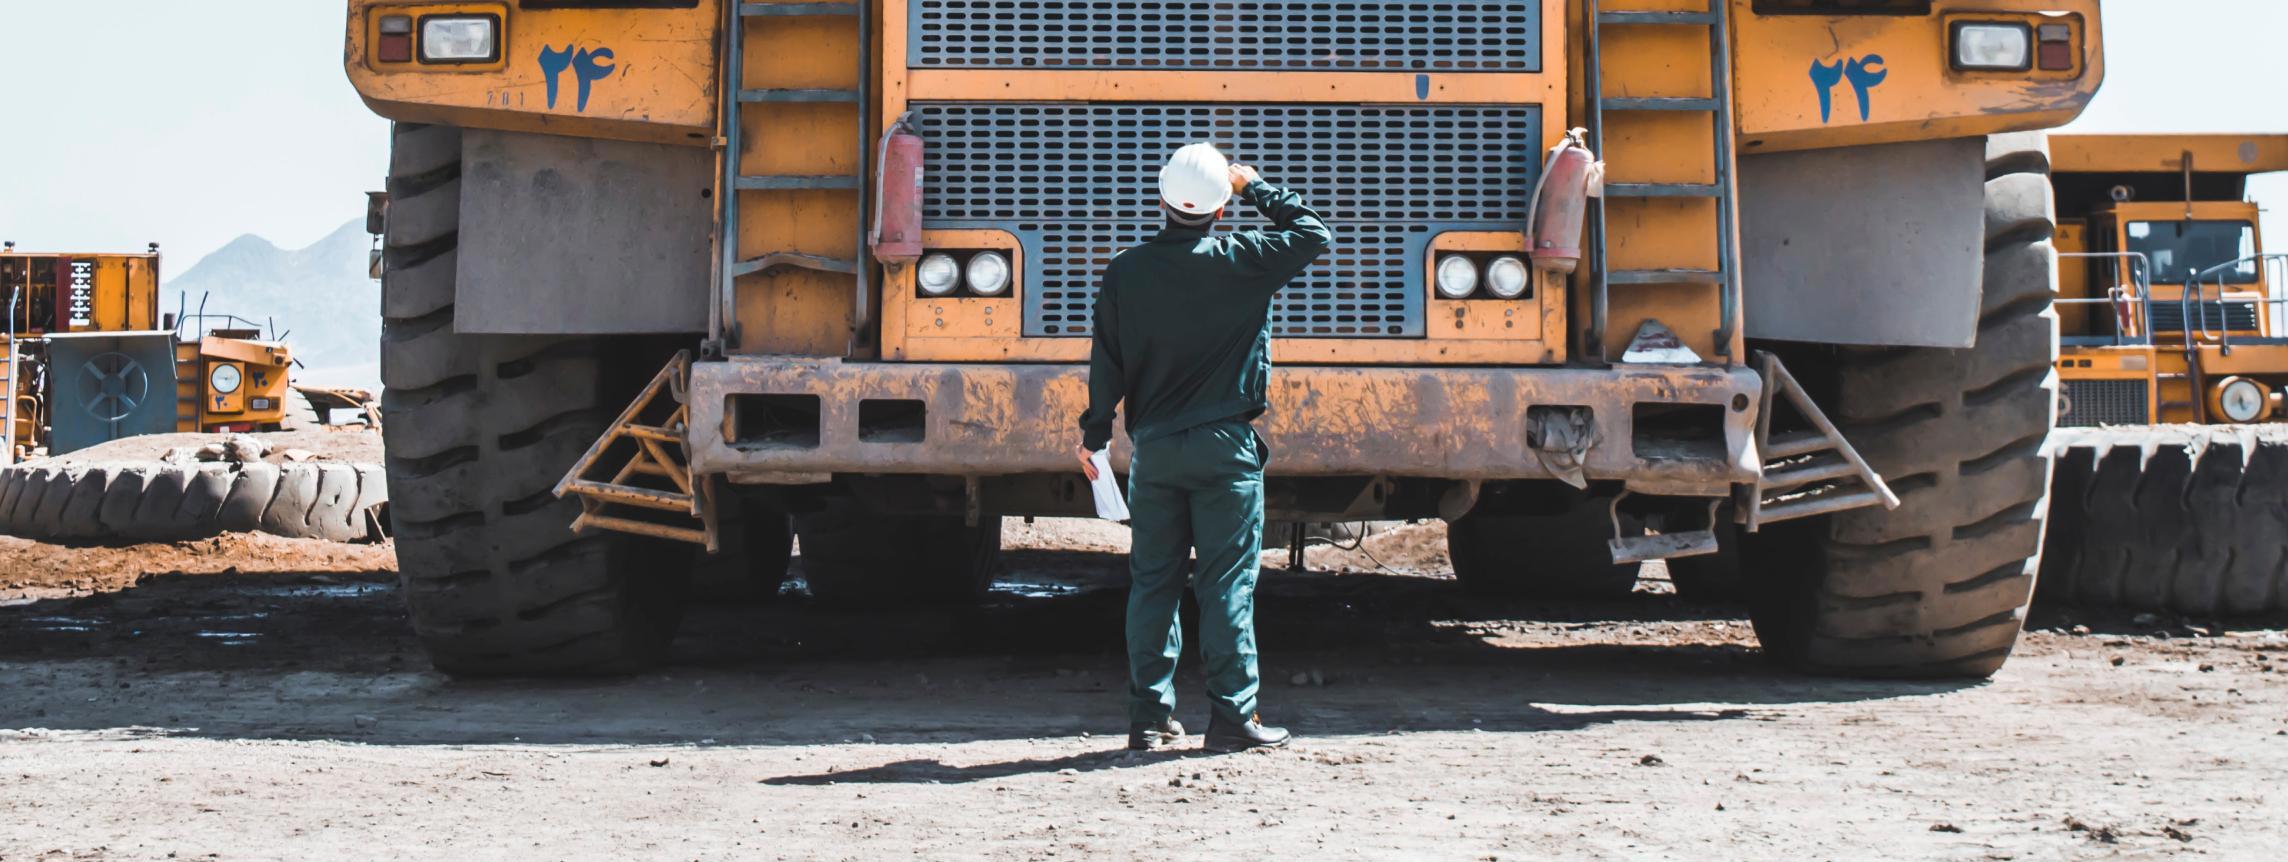 Construction worker looking at large vehicles at a mine